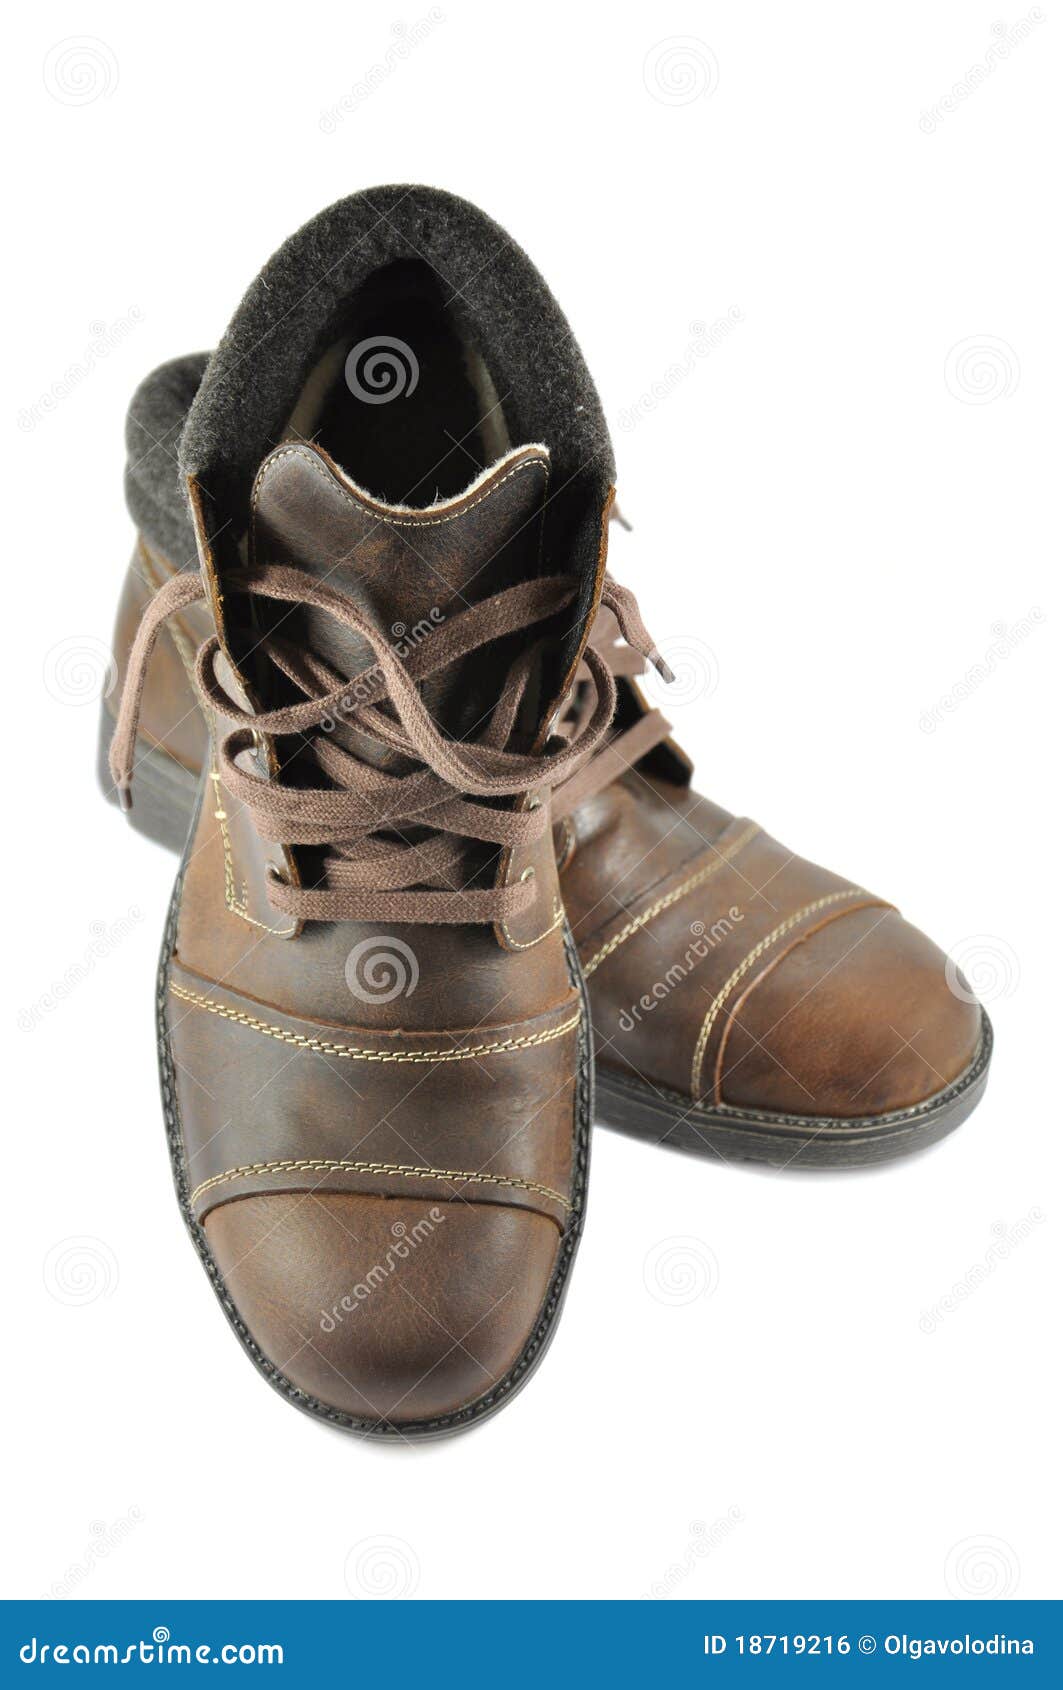 Men s brown shoes isolated stock photo. Image of boots - 18719216